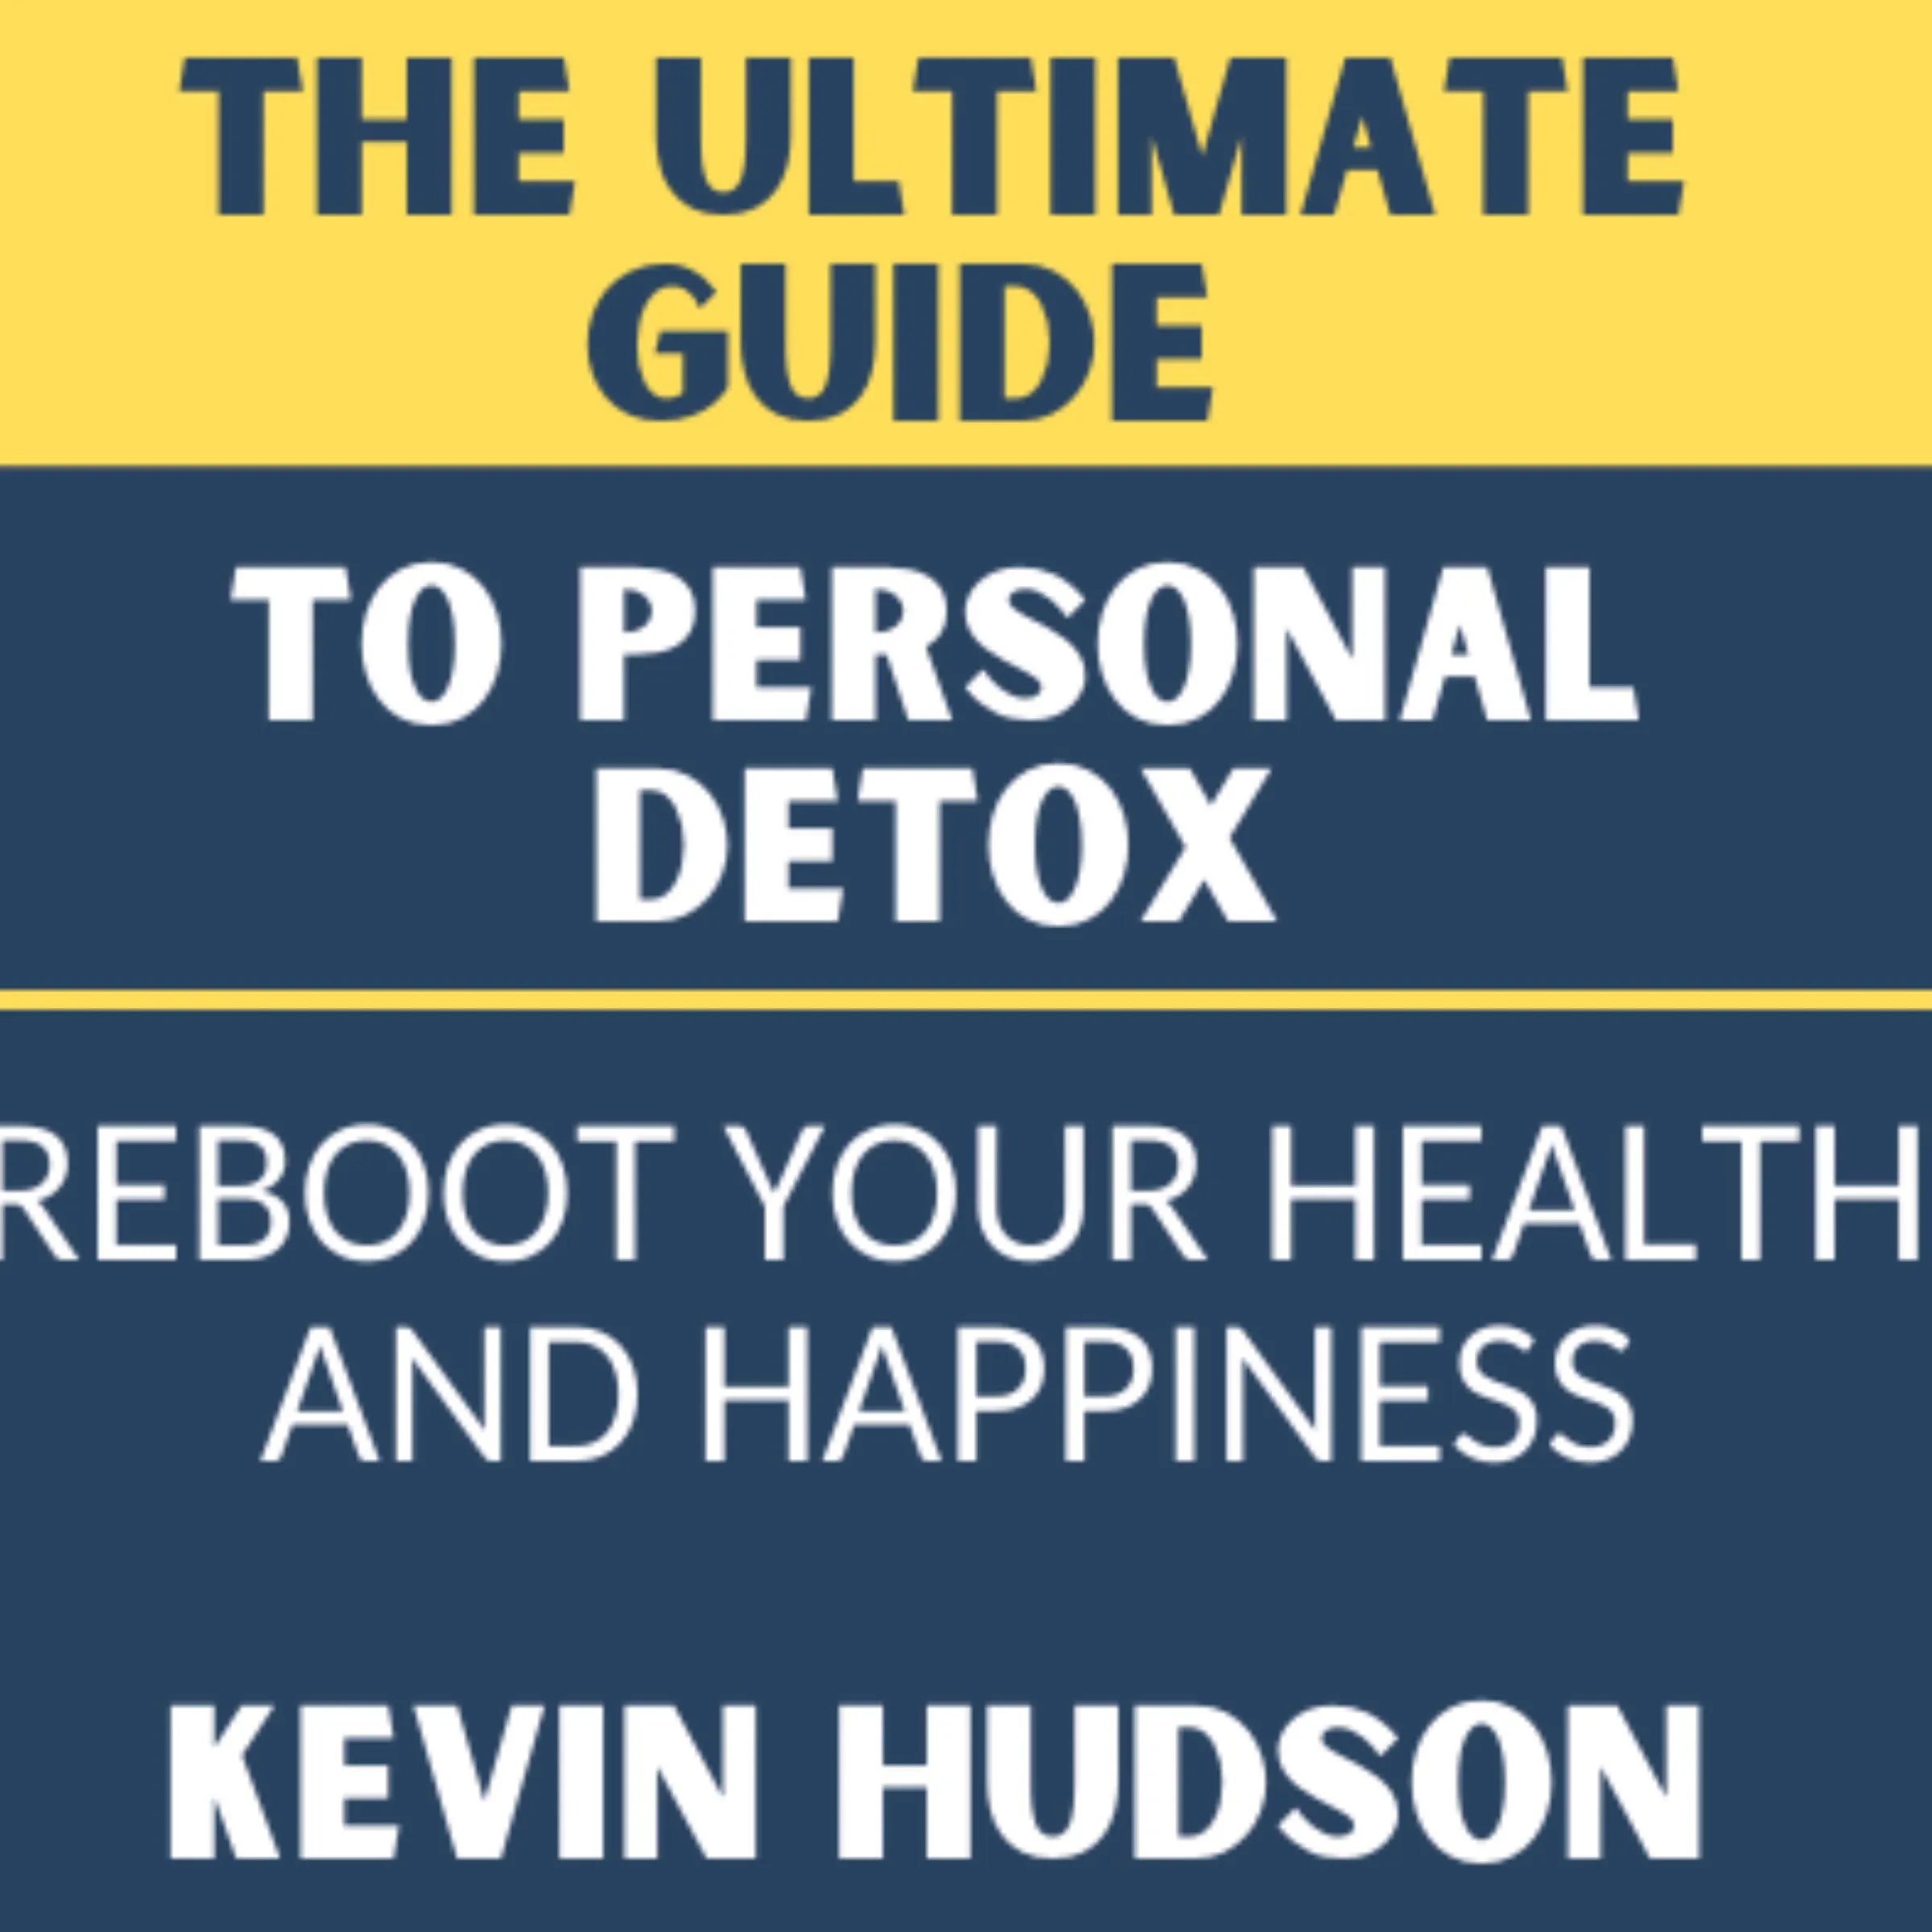 The Ultimate Guide To Personal Detox Audiobook by kevin Hudson